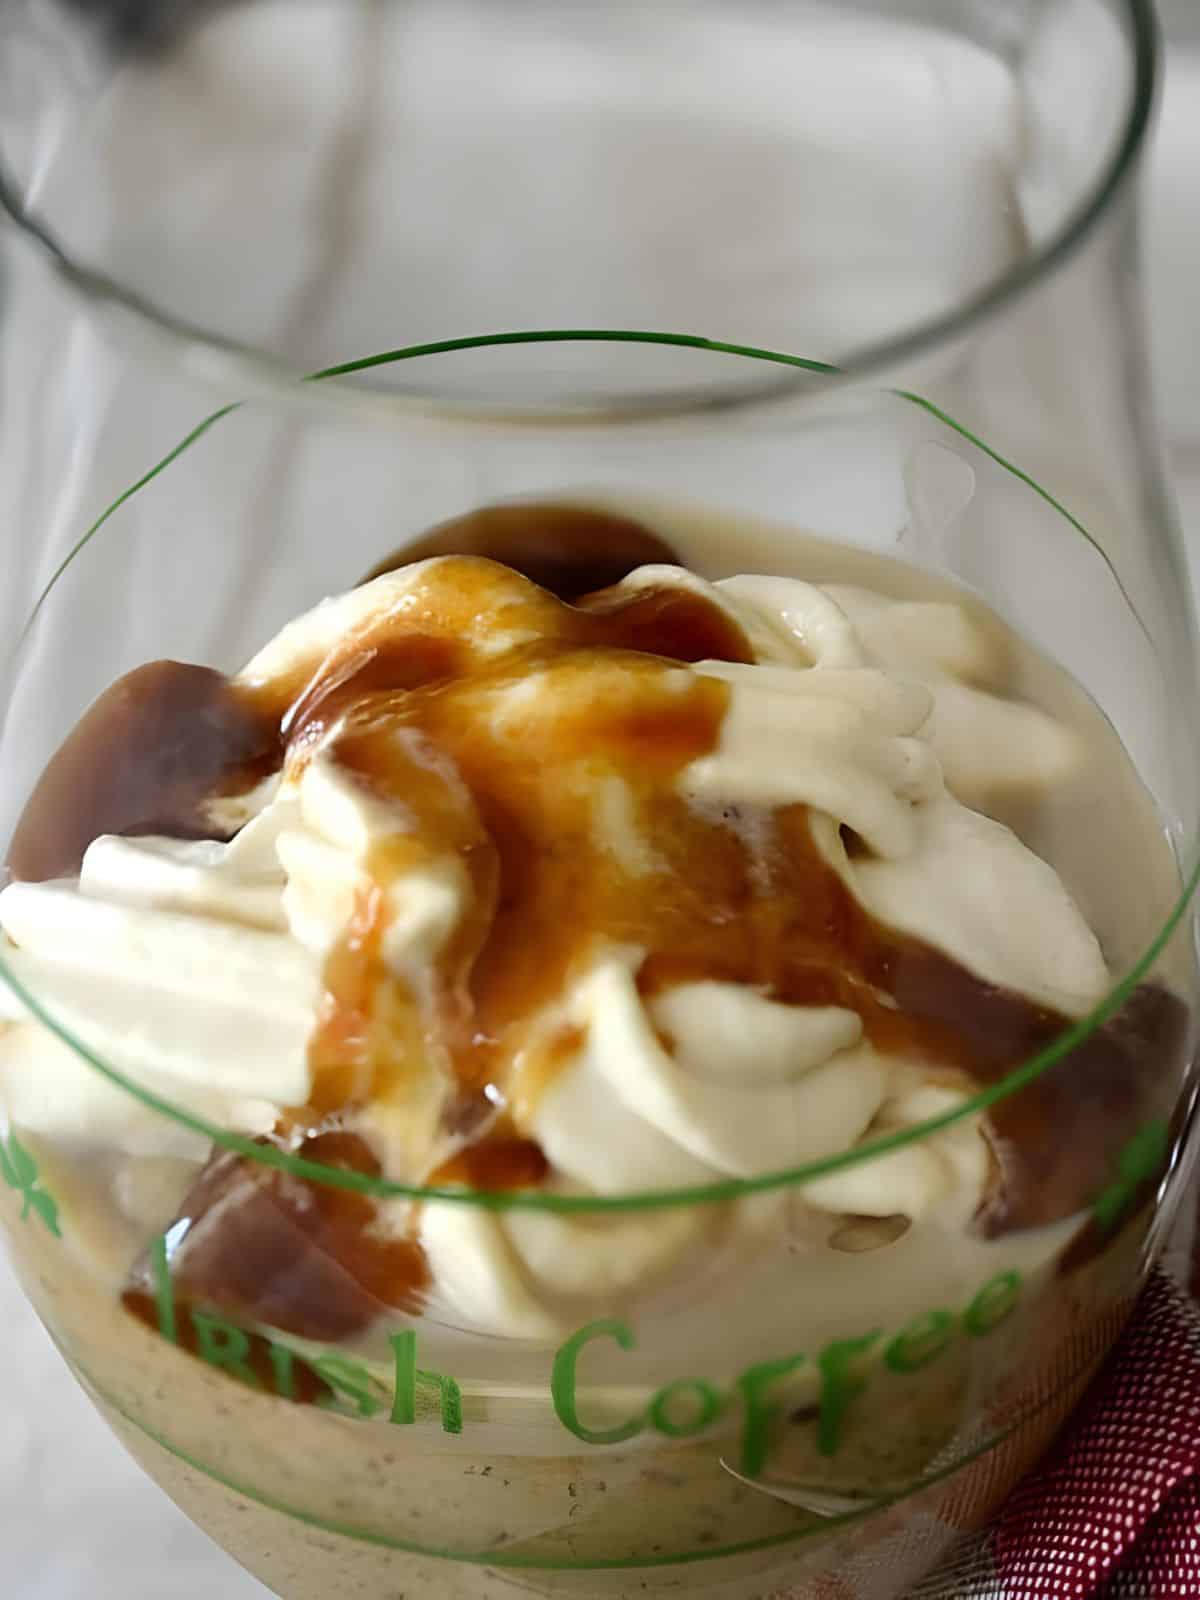 fluffy Irish coffee mousse topped with caramel sauce.